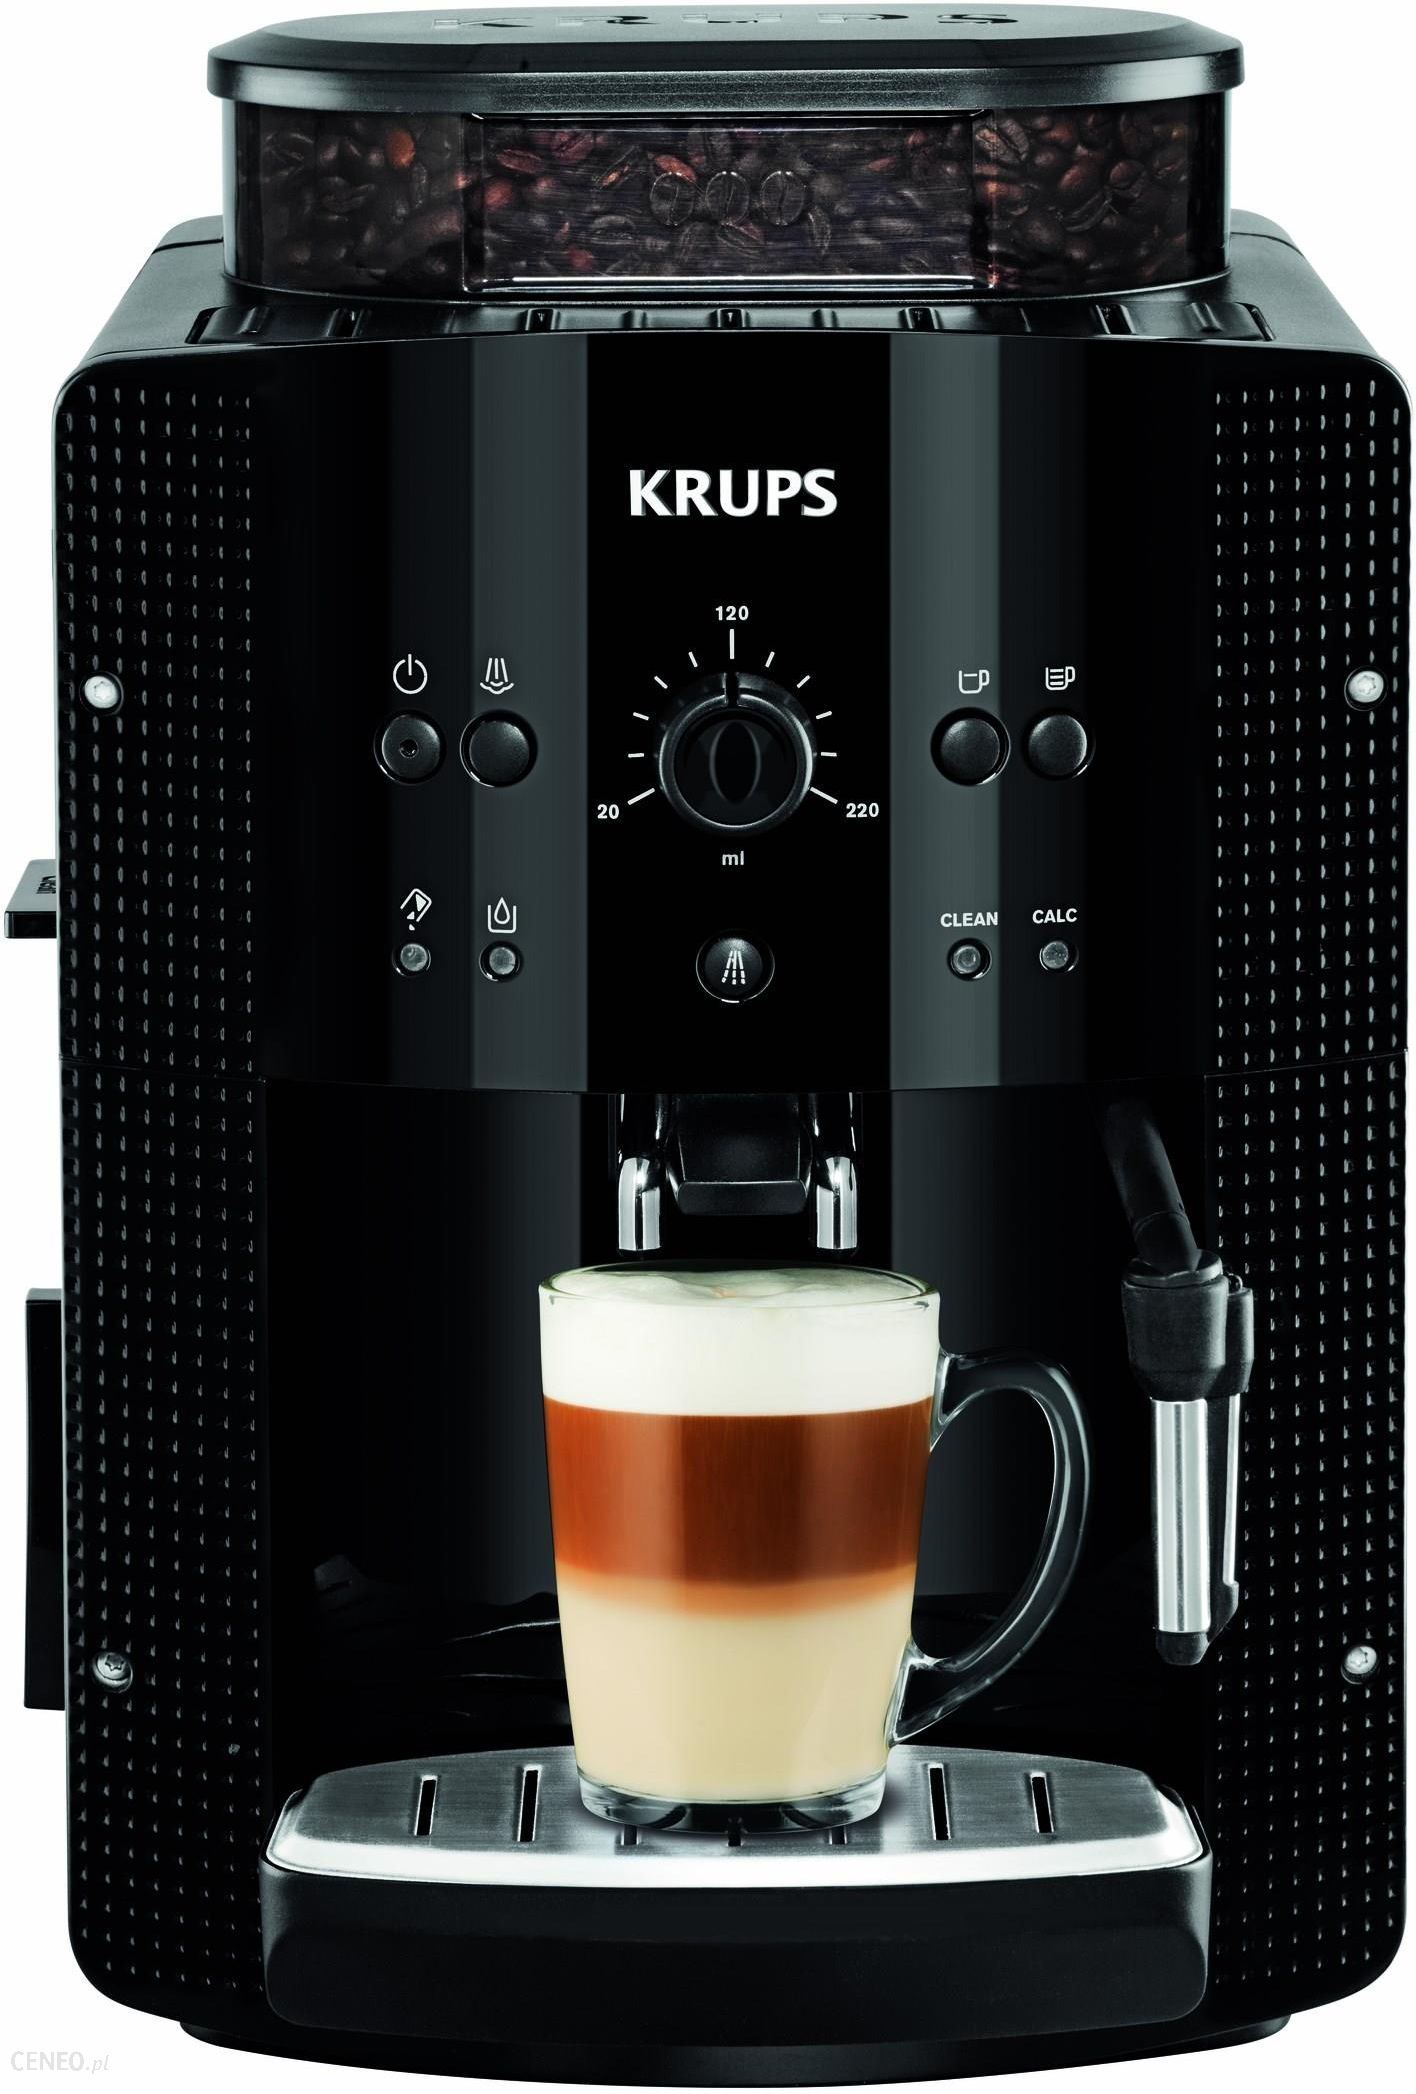 Krups EA 8108 fully automatic Espresso coffee machine black,from